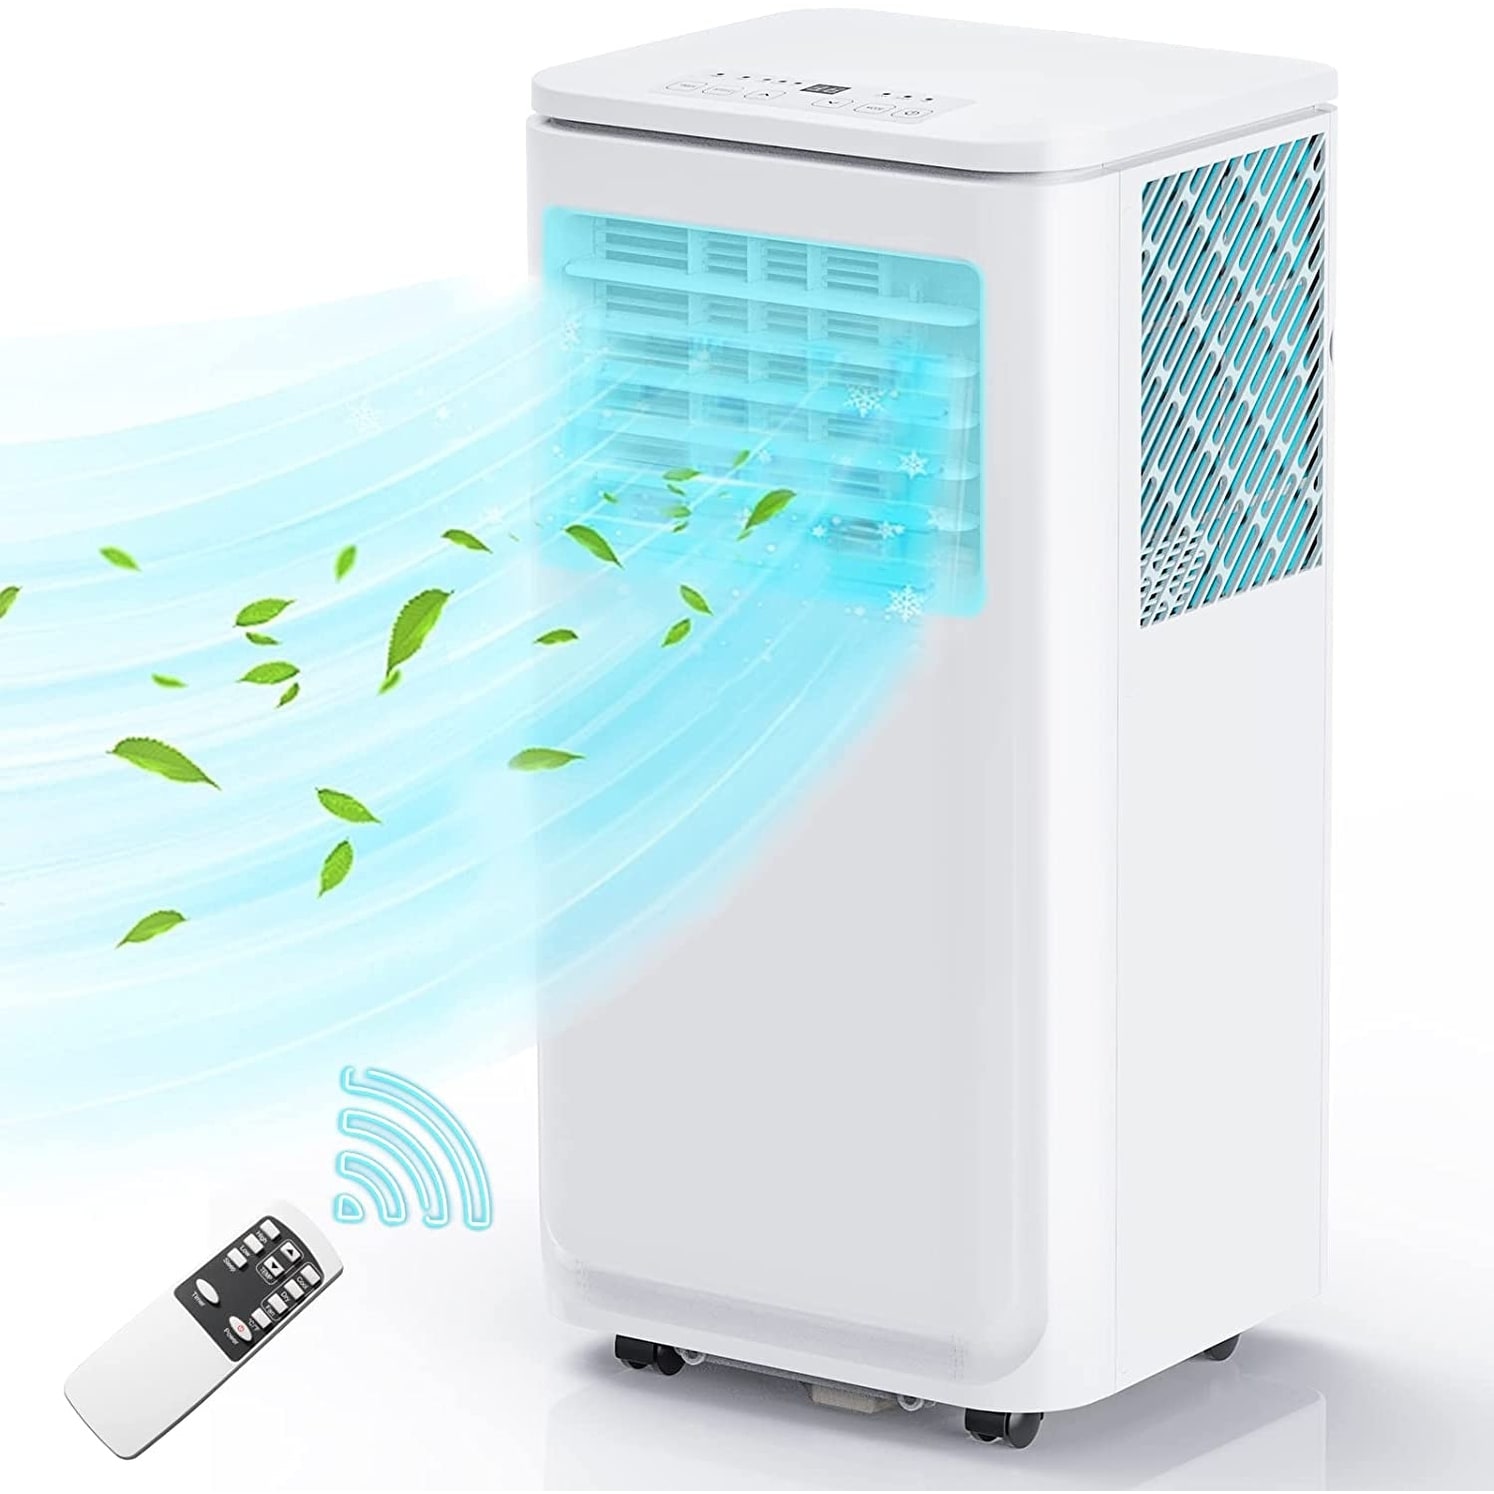 Bossin 8000BTU Portable Air Conditioners,Quiet Room Portable AC Unit up to 350 Sq Ft - 770v